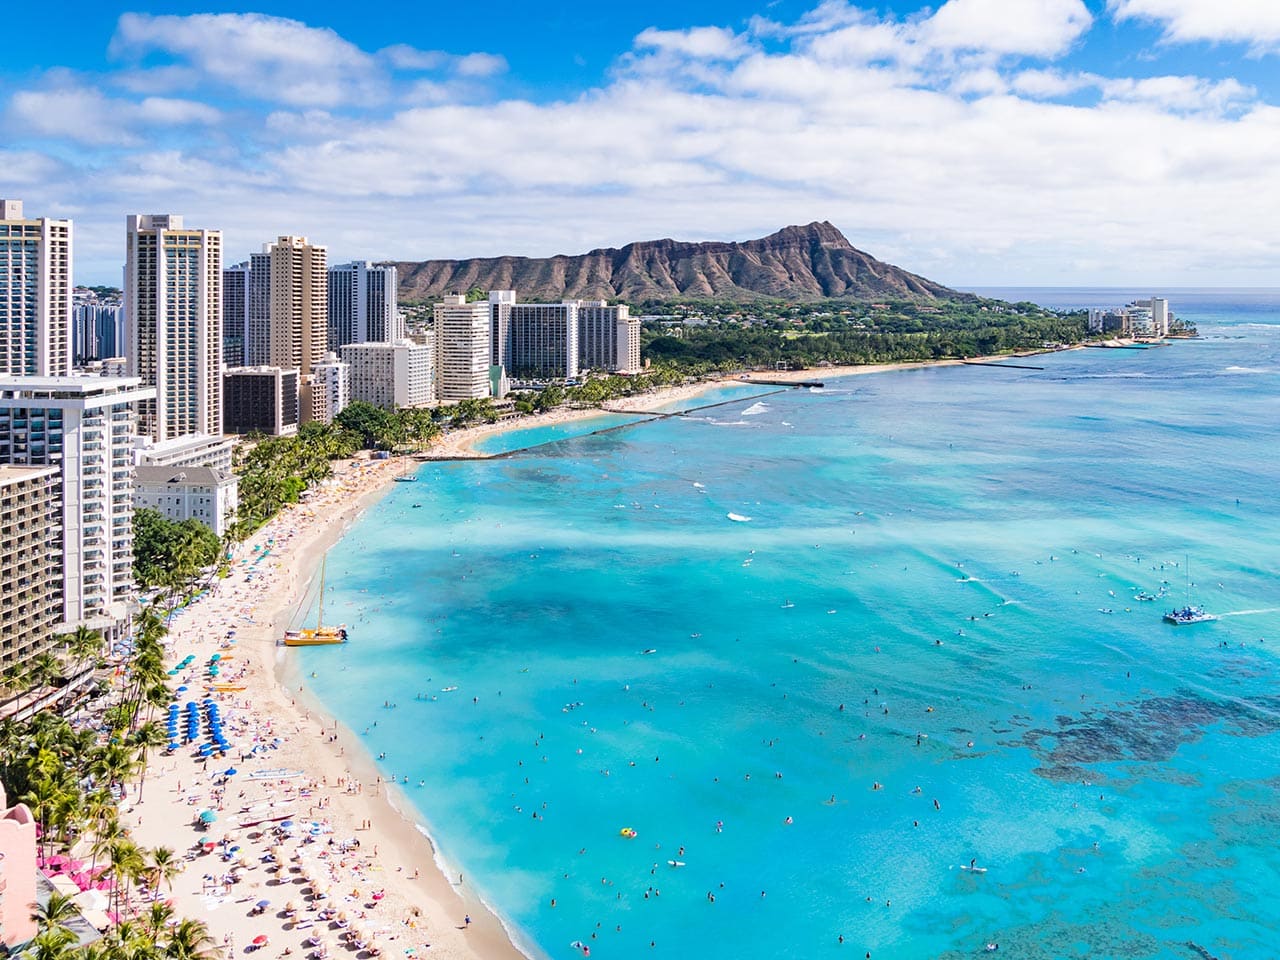 Cheap Flights to Hawaii from California: Los Angeles to Oahu